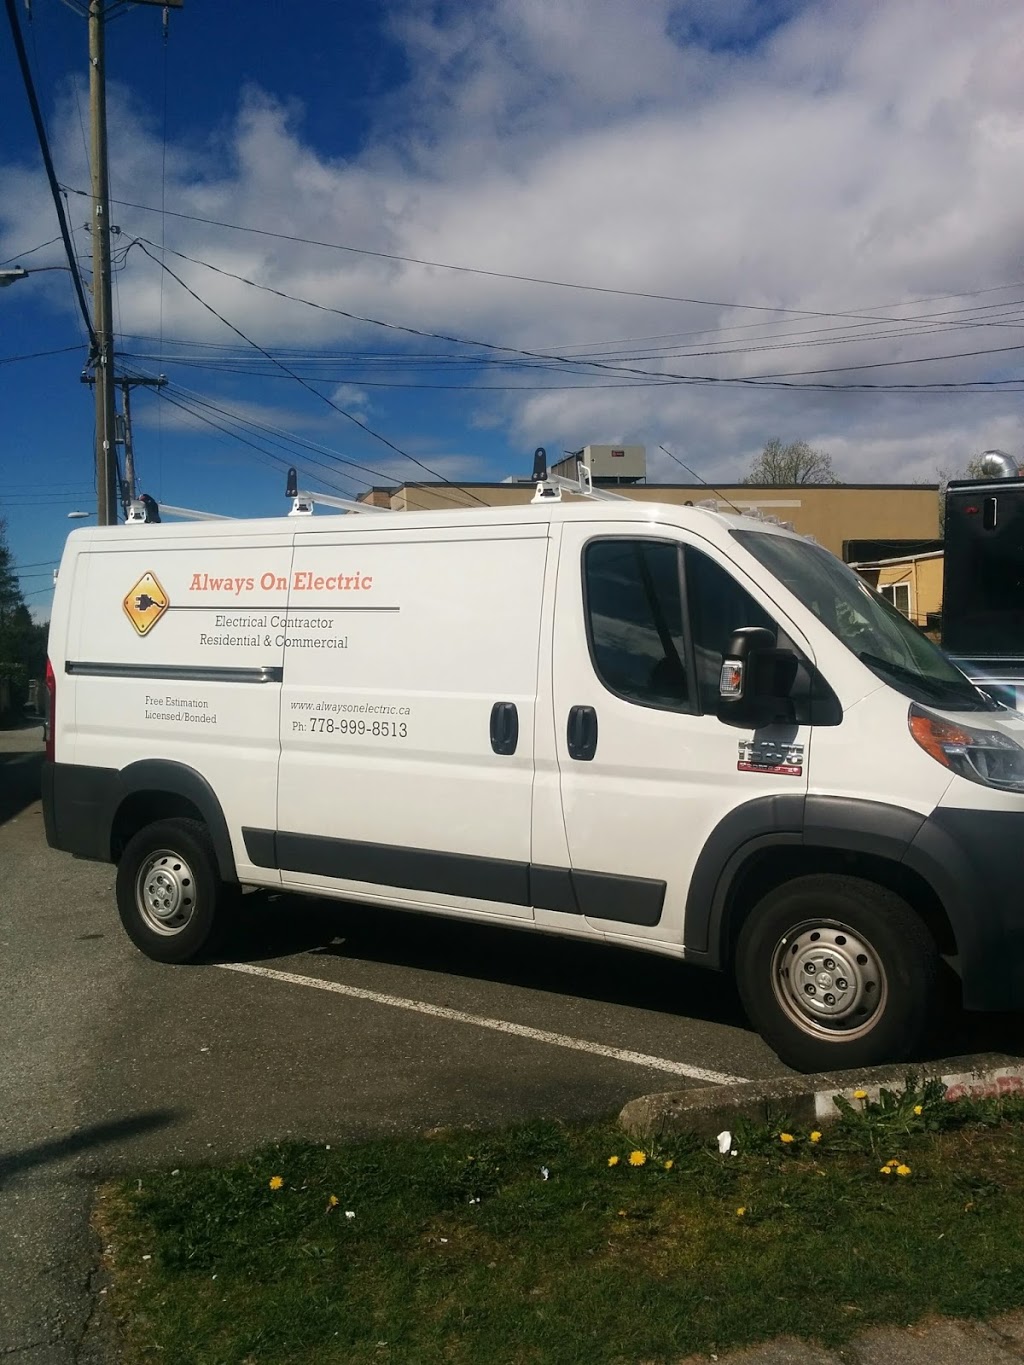 Always On Electric Inc | electrician | 1097 Lombardy Dr, Port Coquitlam, BC V3B 5T8, Canada | 7789998513 OR +1 778-999-8513